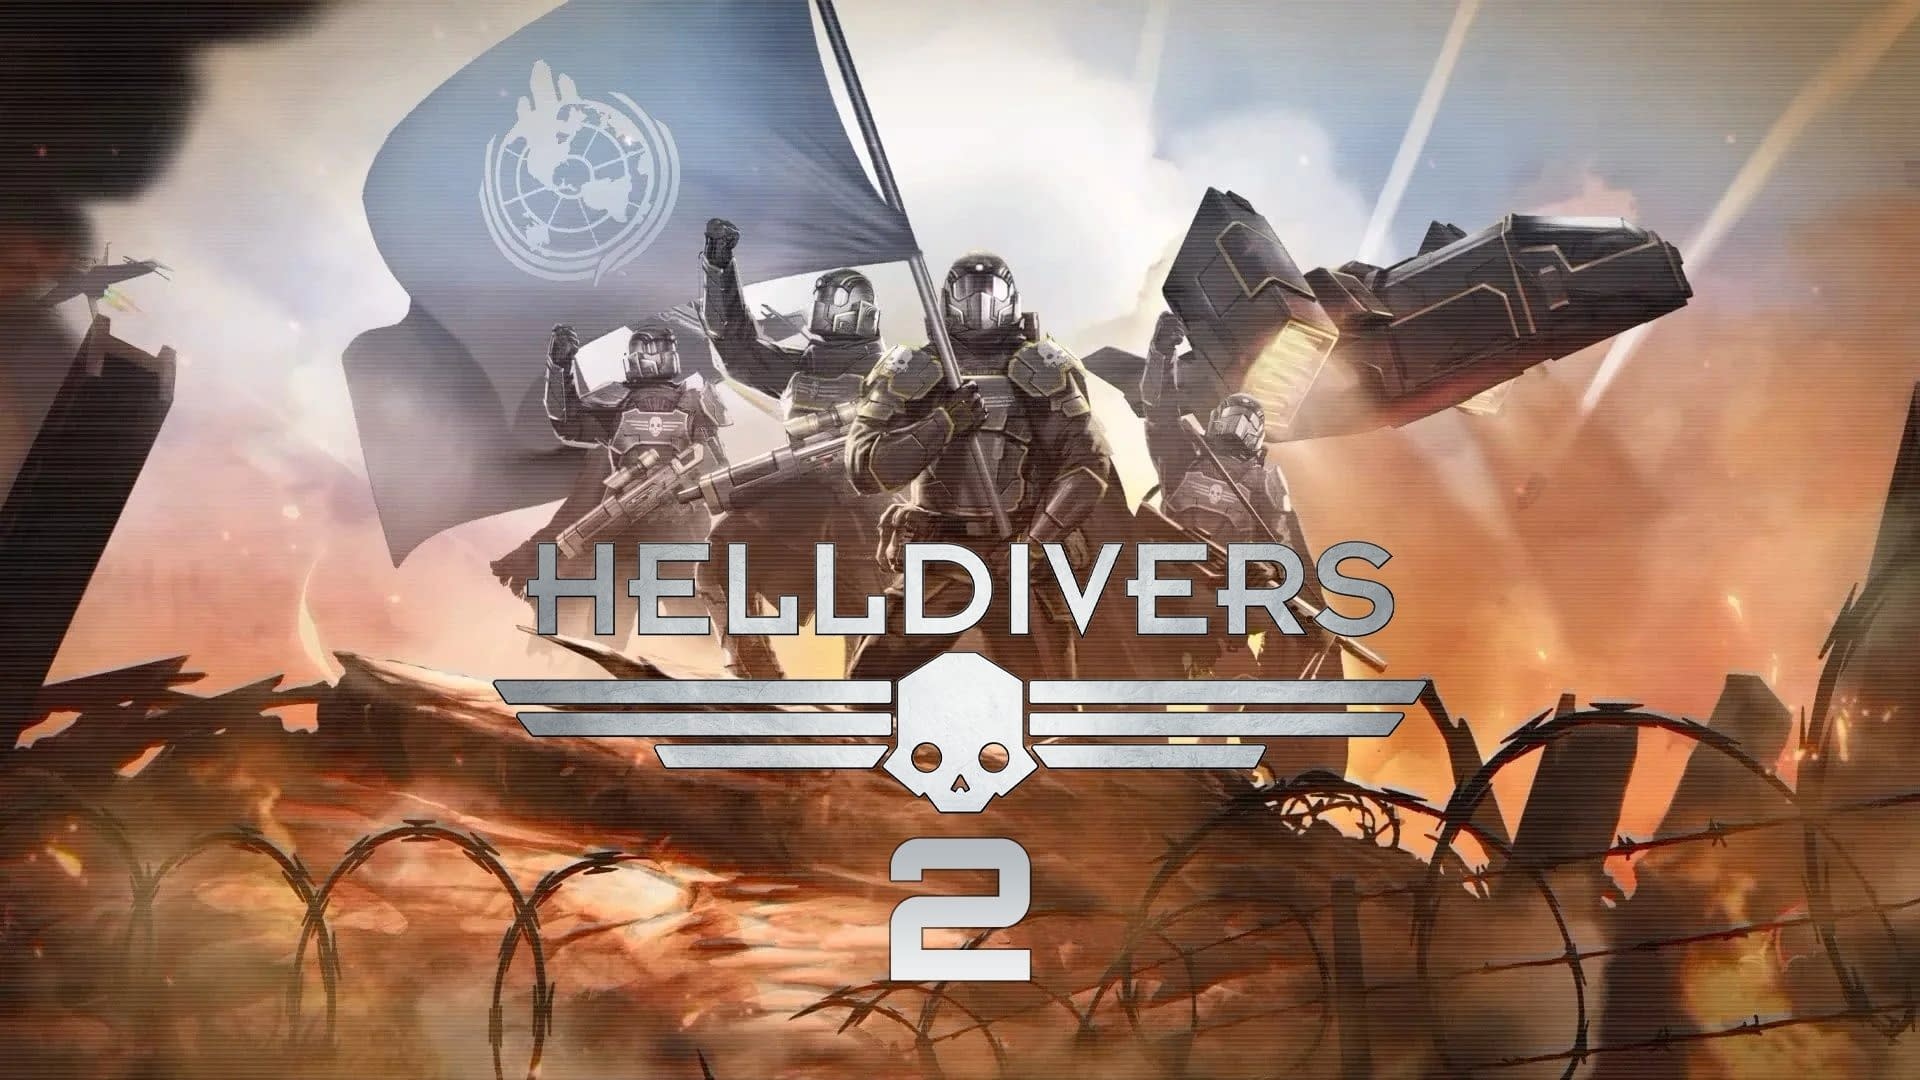 New Screenshots for Helldivers 2 to be published by Playstation PC Published